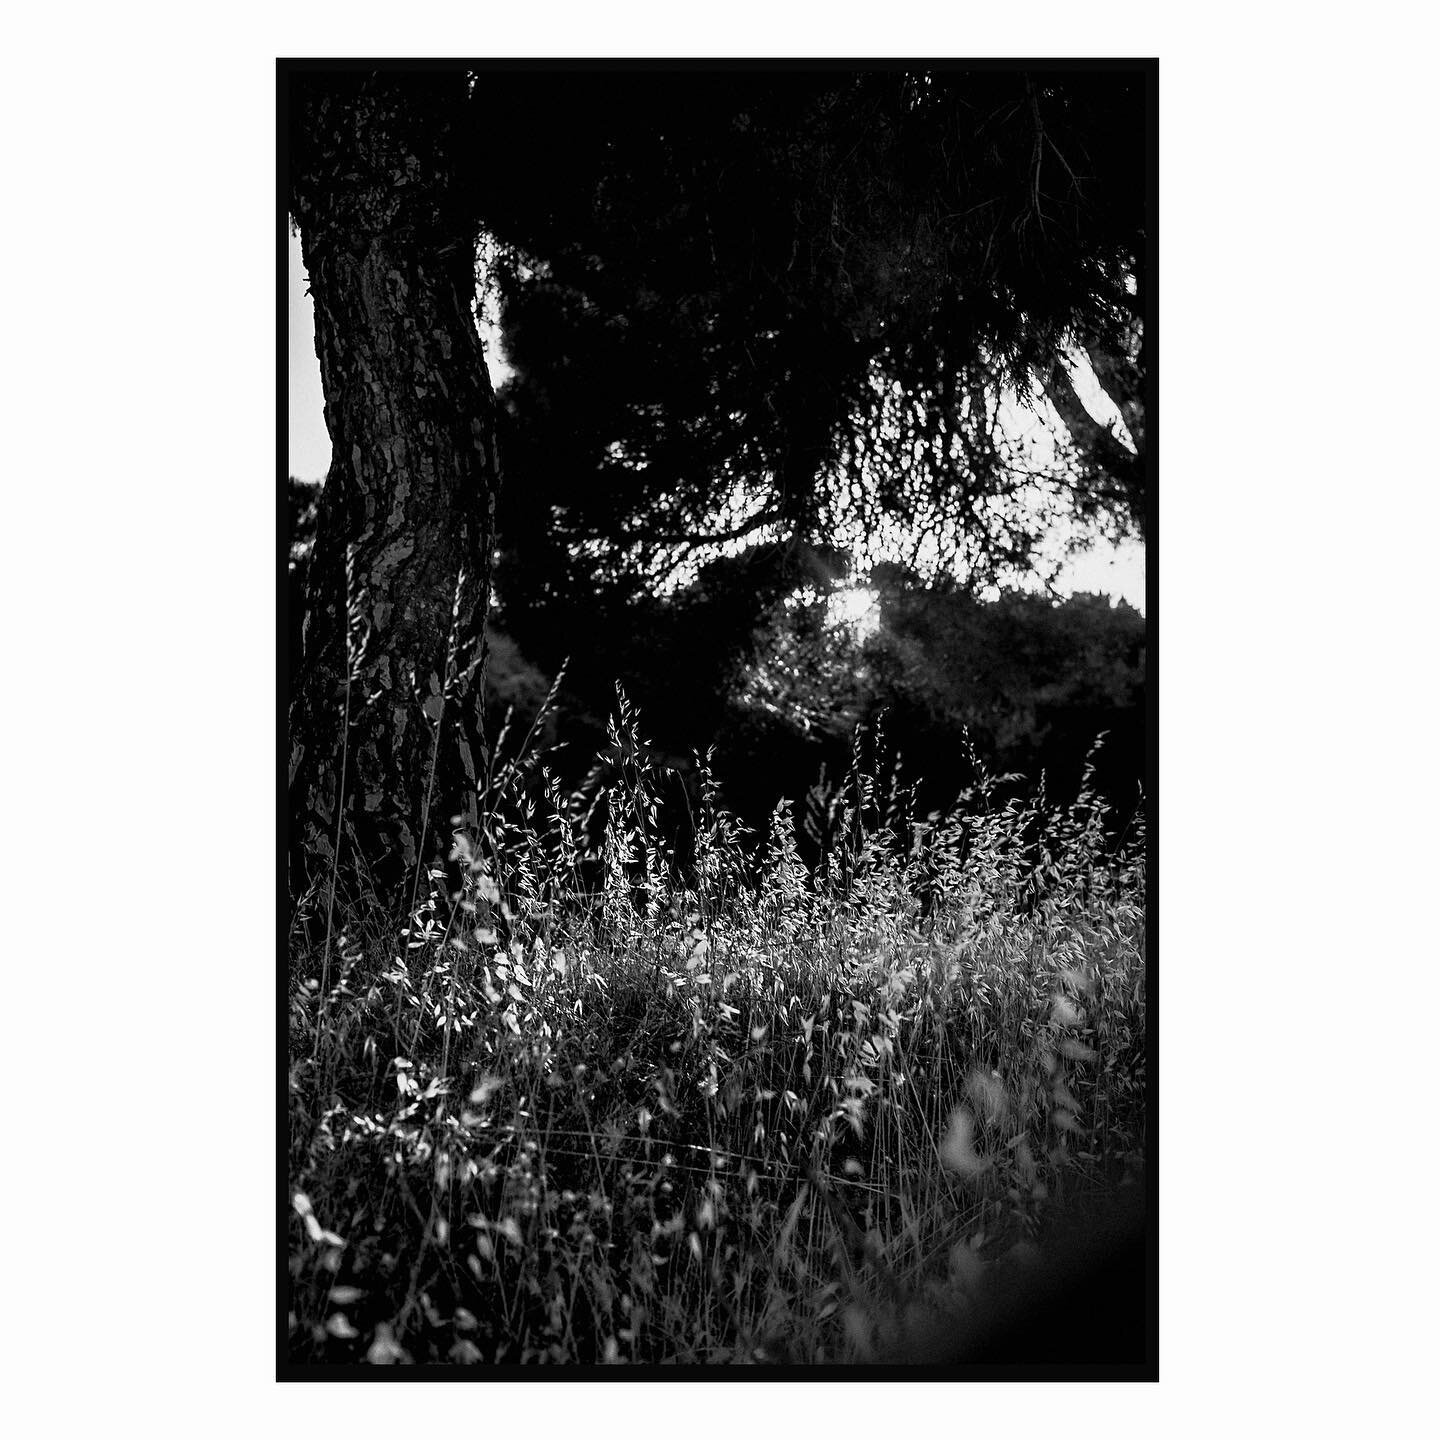 I love to see how the sun's rays are filtered through the grass of the forest... they are seconds of incredible spectacle... a wonder that I never tire of observing

All rights reserved. More images to buy in the bios link.

Copyright photos: &copy;F